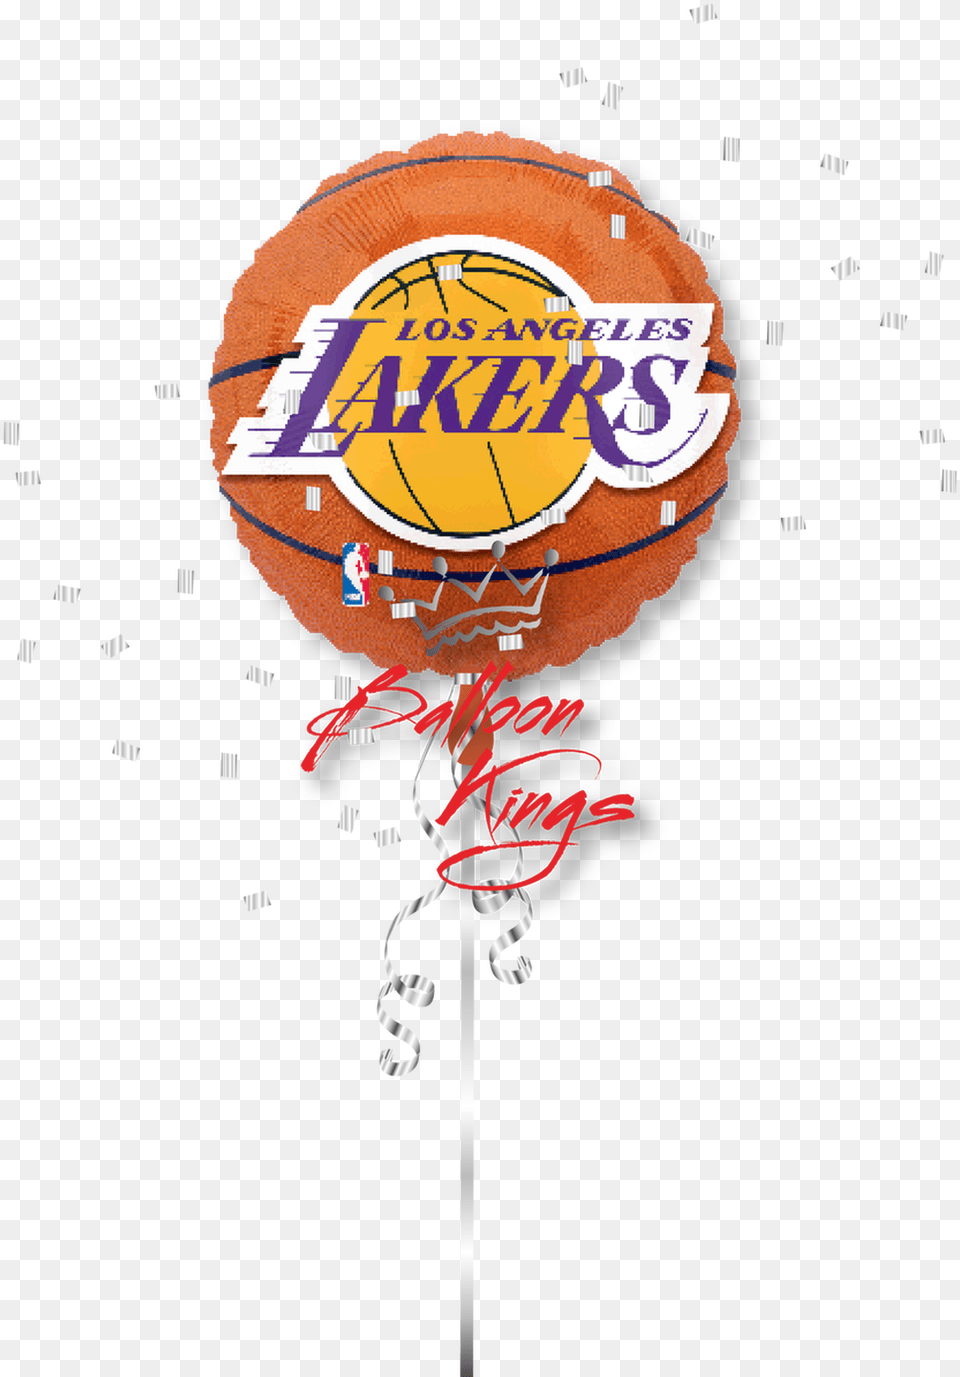 La Lakers Golden State Warriors Balloons, Candy, Food, Sweets, Lollipop Free Png Download